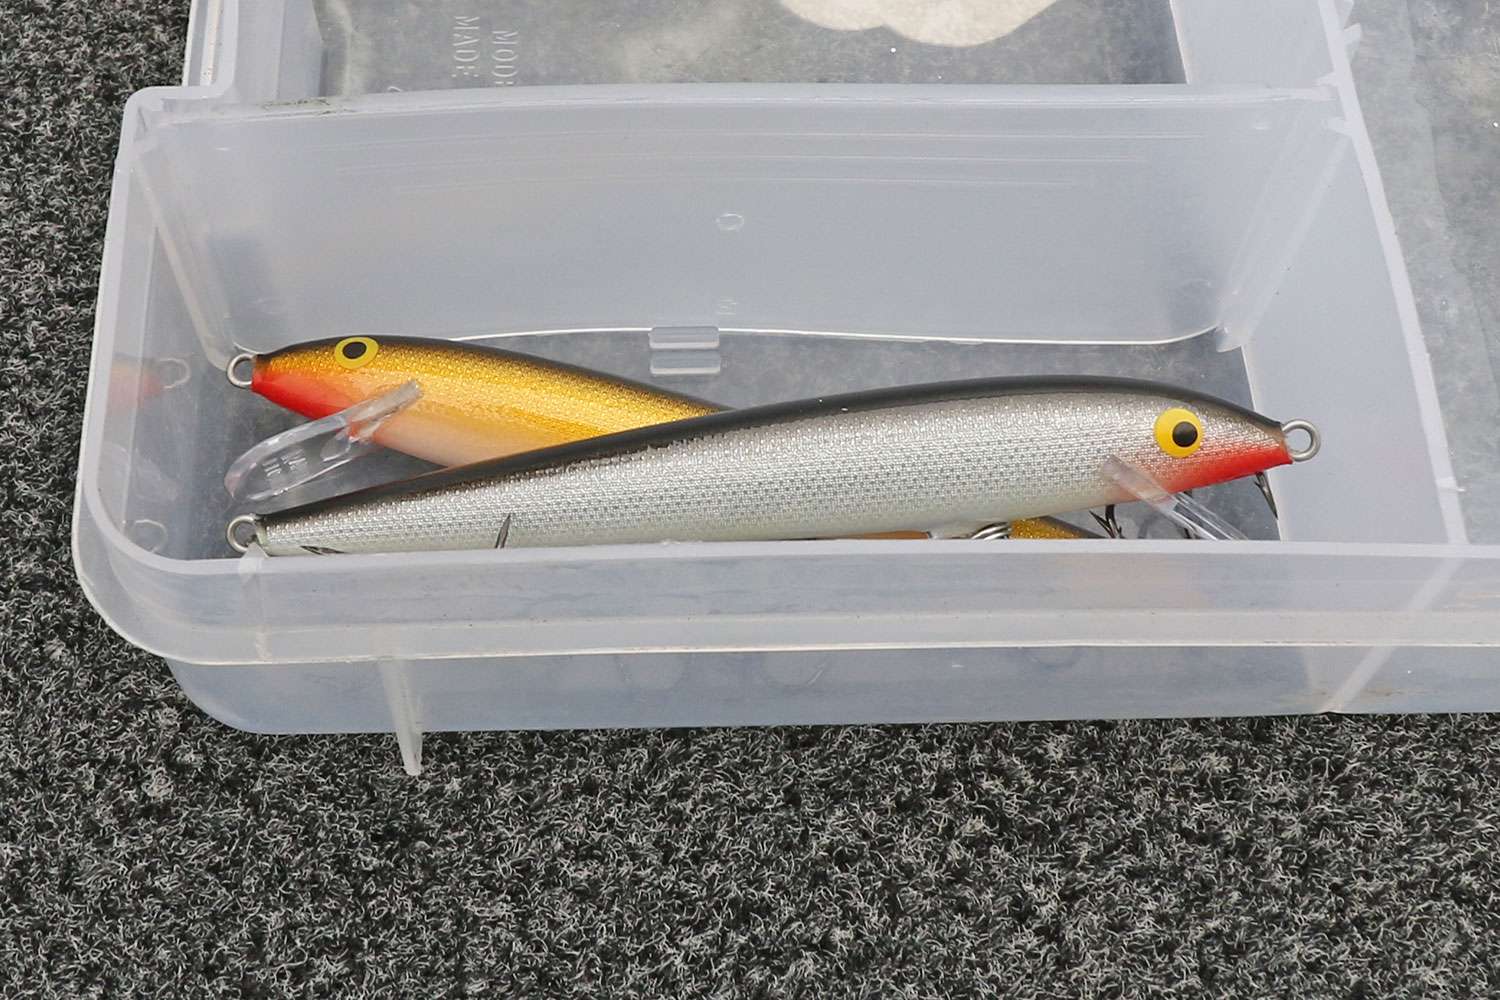 This was one of the original hardbaits on the market, and Wheeler said they still have their magic.